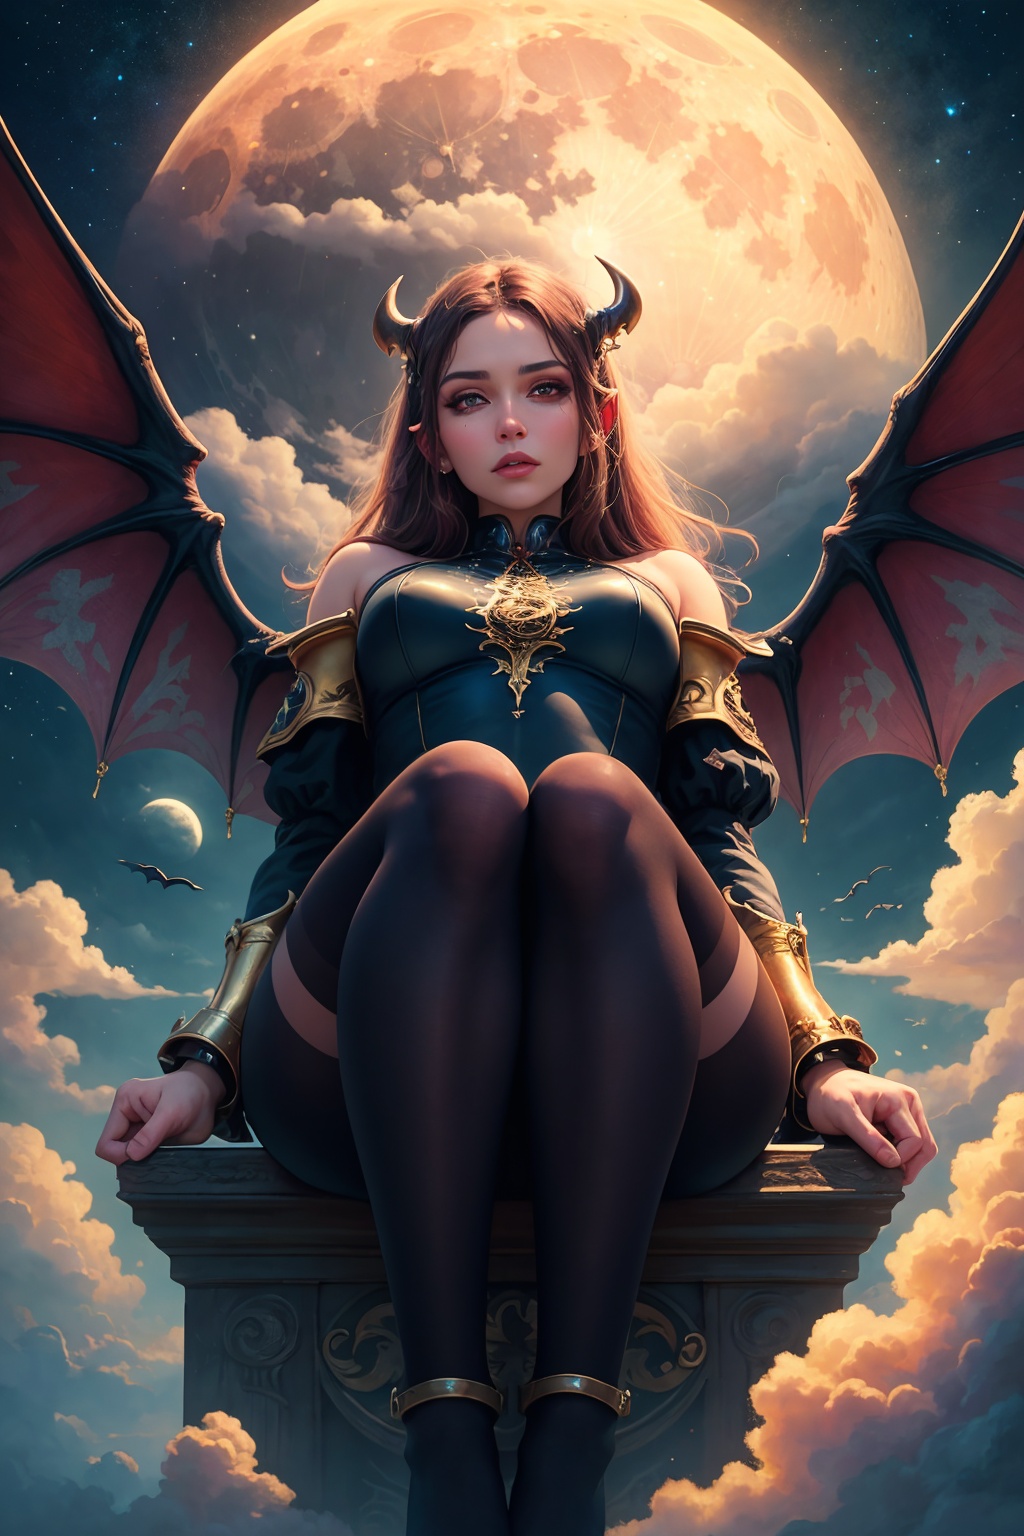 ((best quality)), ((masterpiece)), (detailed), succubus, ethereal beauty, perched on a cloud, (fantasy illustration:1.3), enchanting gaze, leotard, pantyhose, stockings, bodysuit, captivating pose, delicate wings, otherworldly charm, mystical sky, large moon, moonlit night, soft colors, (detailed cloudscape:1.3), (high-resolution:1.2), from below, (rating_explicit), (score_9, score_8_up, score_7_up, score_6_up, score_5_up, score_4_up, high res, 4k)